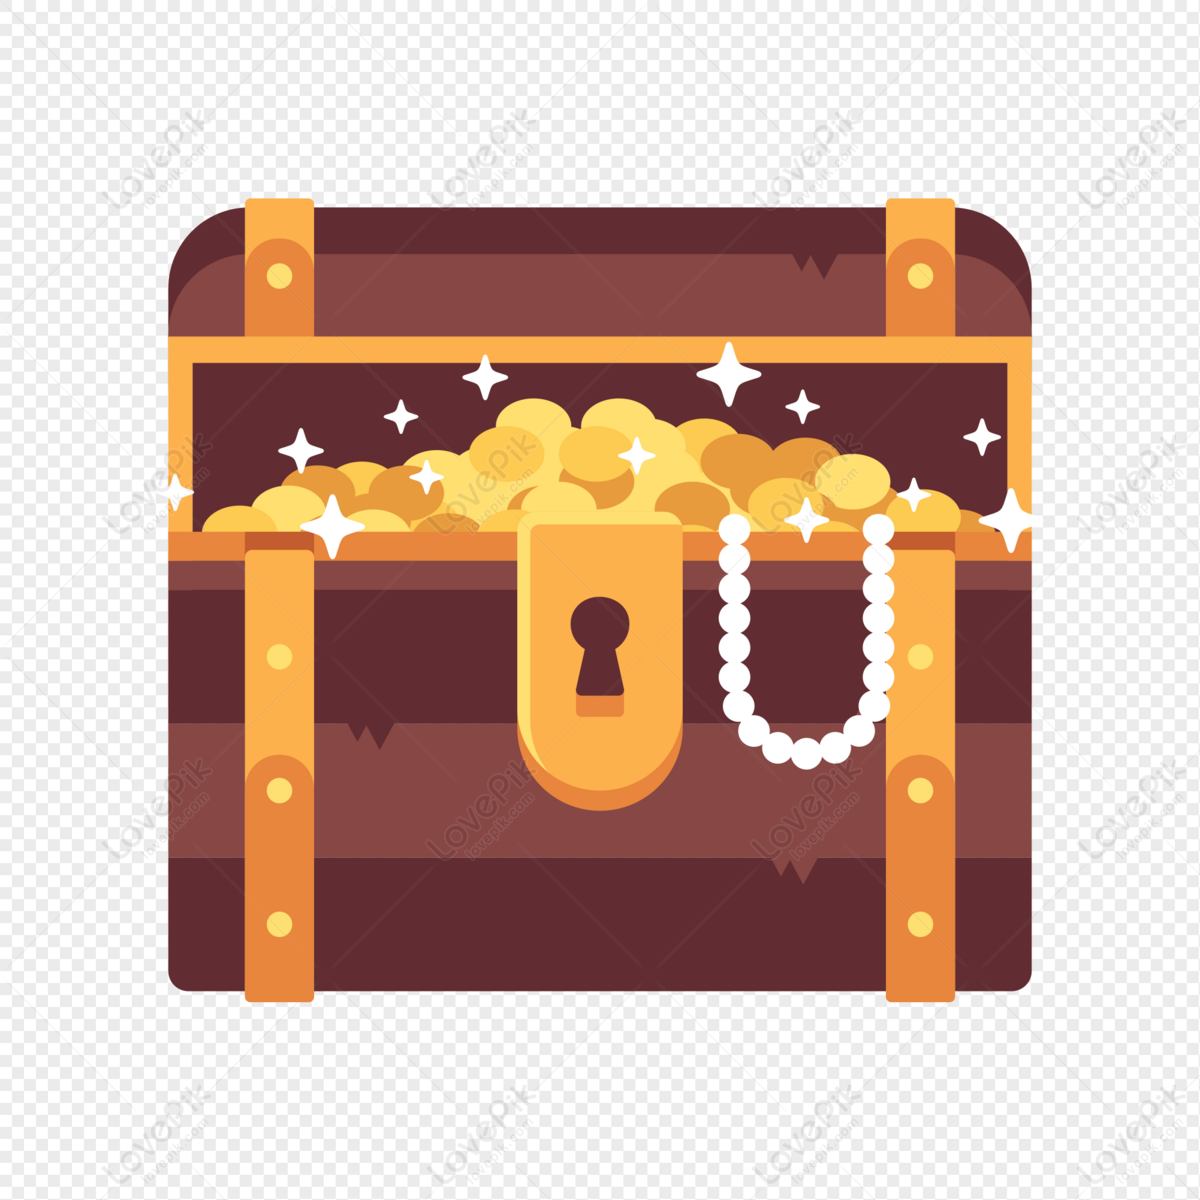 Treasure Chest PNG Hd Transparent Image And Clipart Image For Free Download  - Lovepik | 401721164